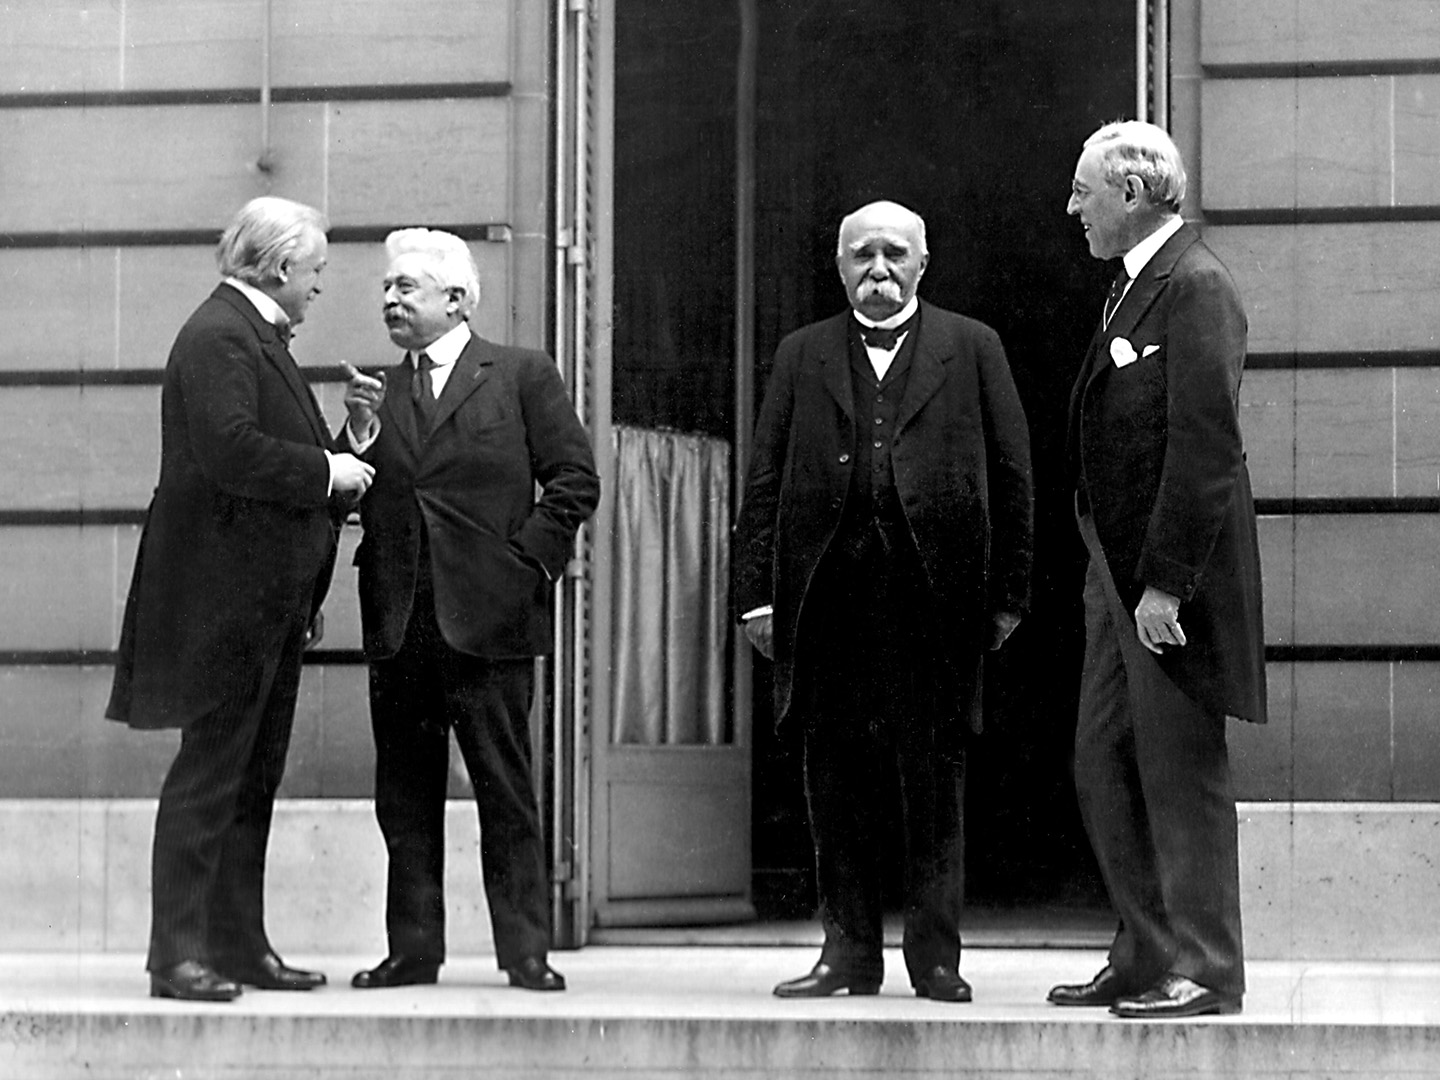 The Council of Four (from left to right): British Prime Minister David Lloyd George, Italian Prime Minister Vittorio Orlando, French Prime Minister Georges Clemenceau and American President Woodrow Wilson in Versailles.